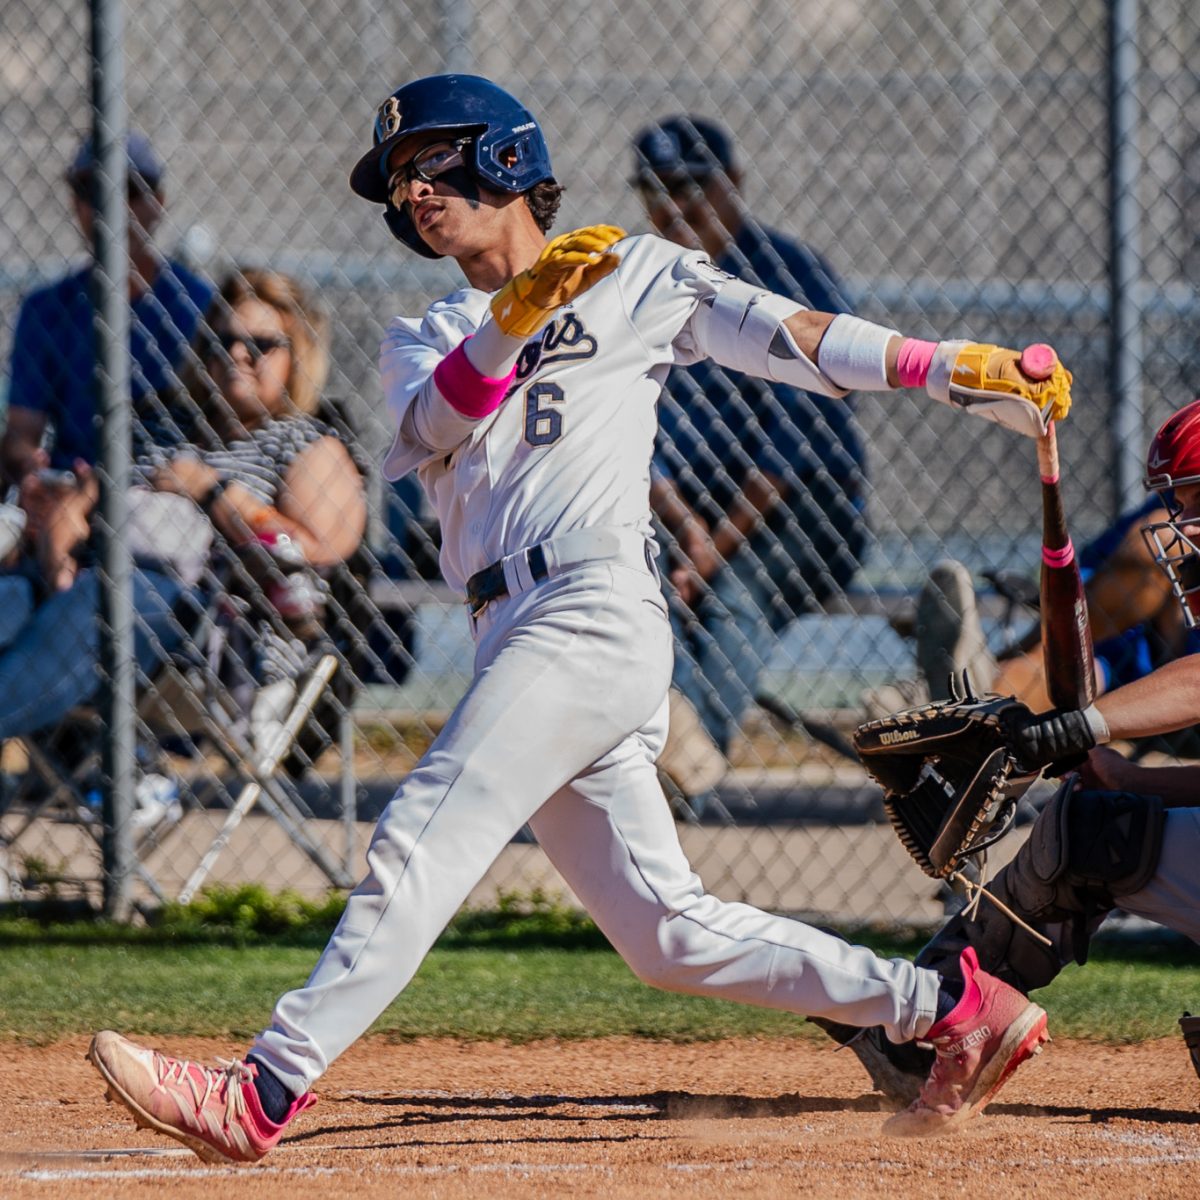 On April 10, the Bonita Vista High (BVH) Barons boys varsity baseball team battled the West Hills High (WHH) Wolfpack in a one sided victory.  BVH shortstop, second baseman and senior Luis Sosa (6) hits the ball into deep left field for his second double of the game. 